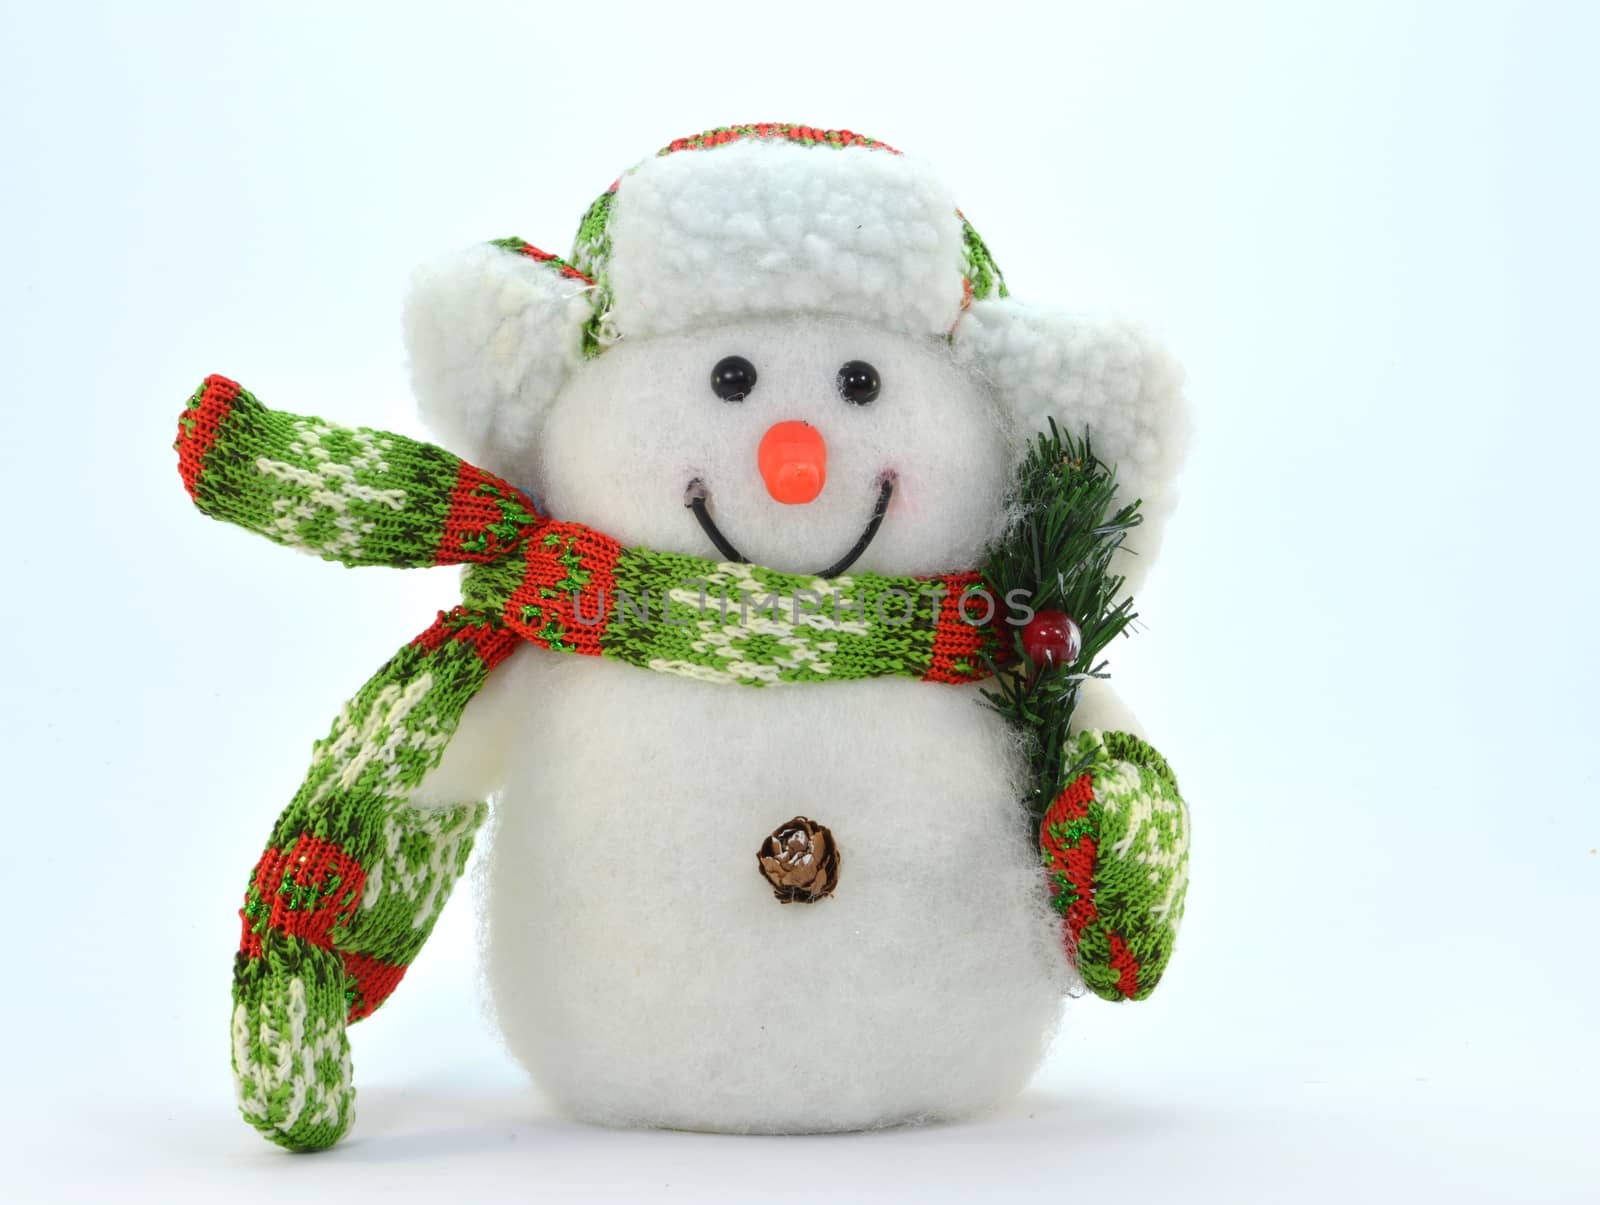 Snowman with a branch and a green and red scarf.